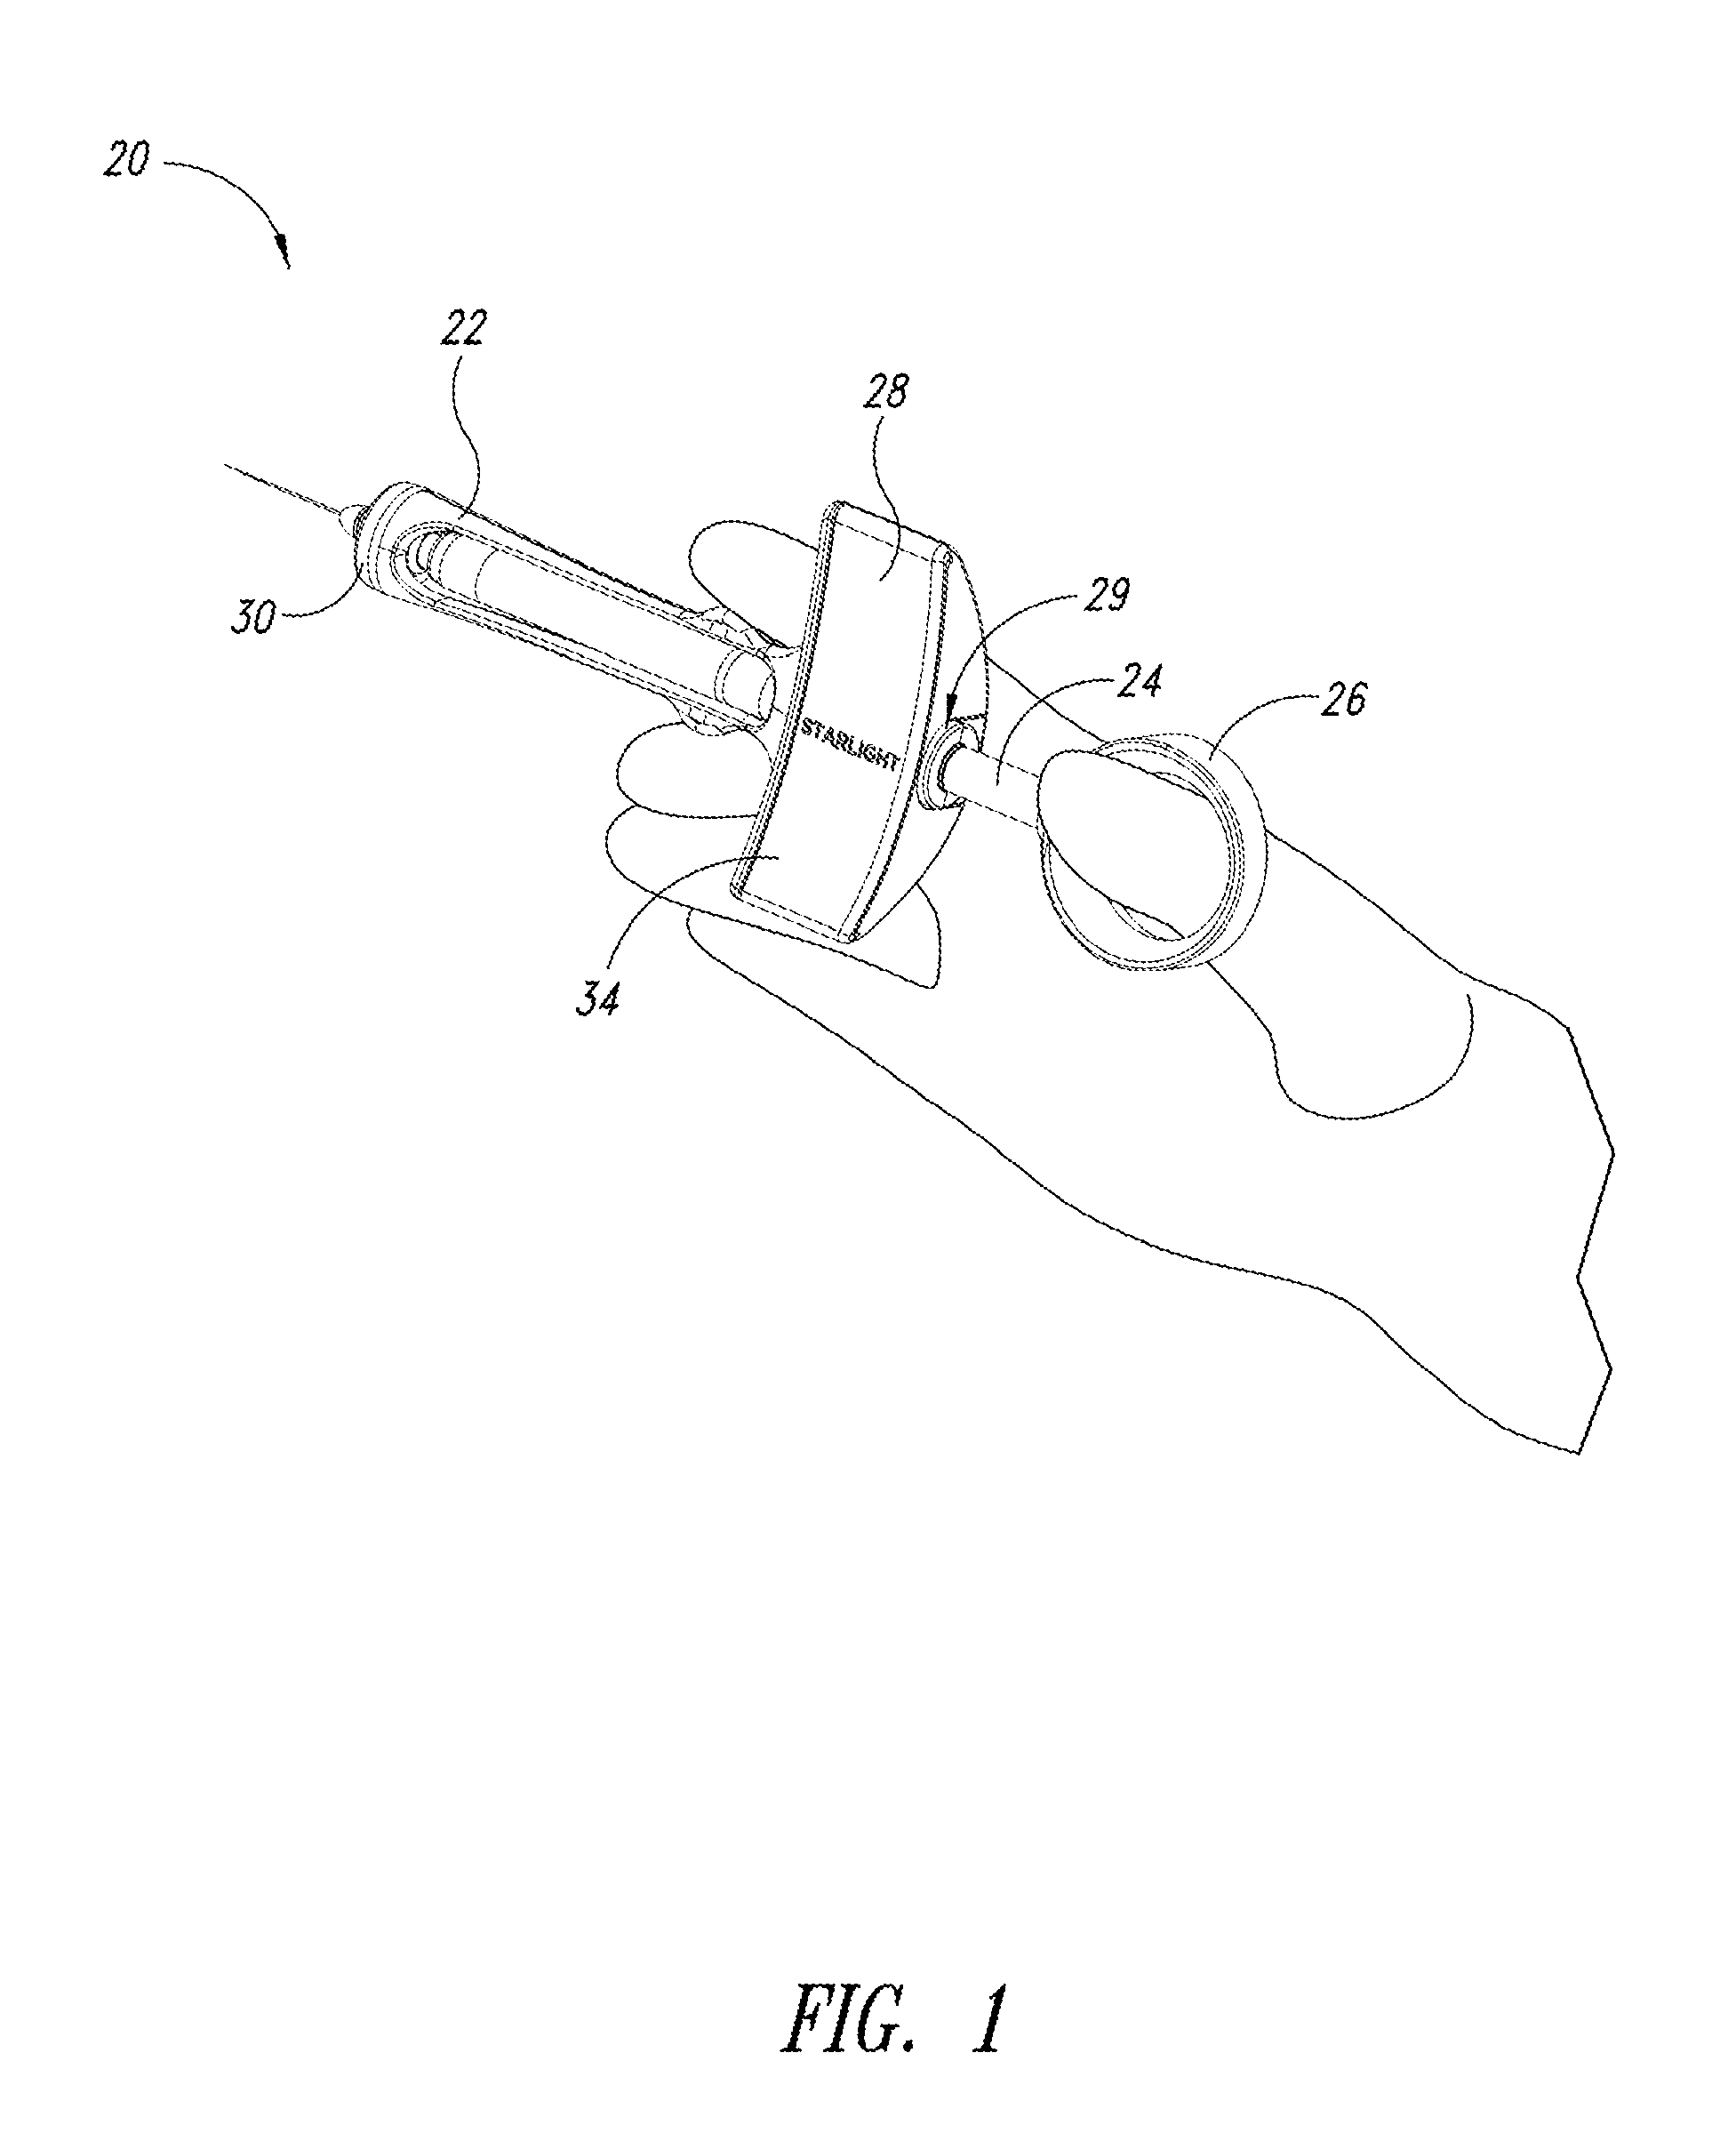 Illuminated intra-oral delivery device